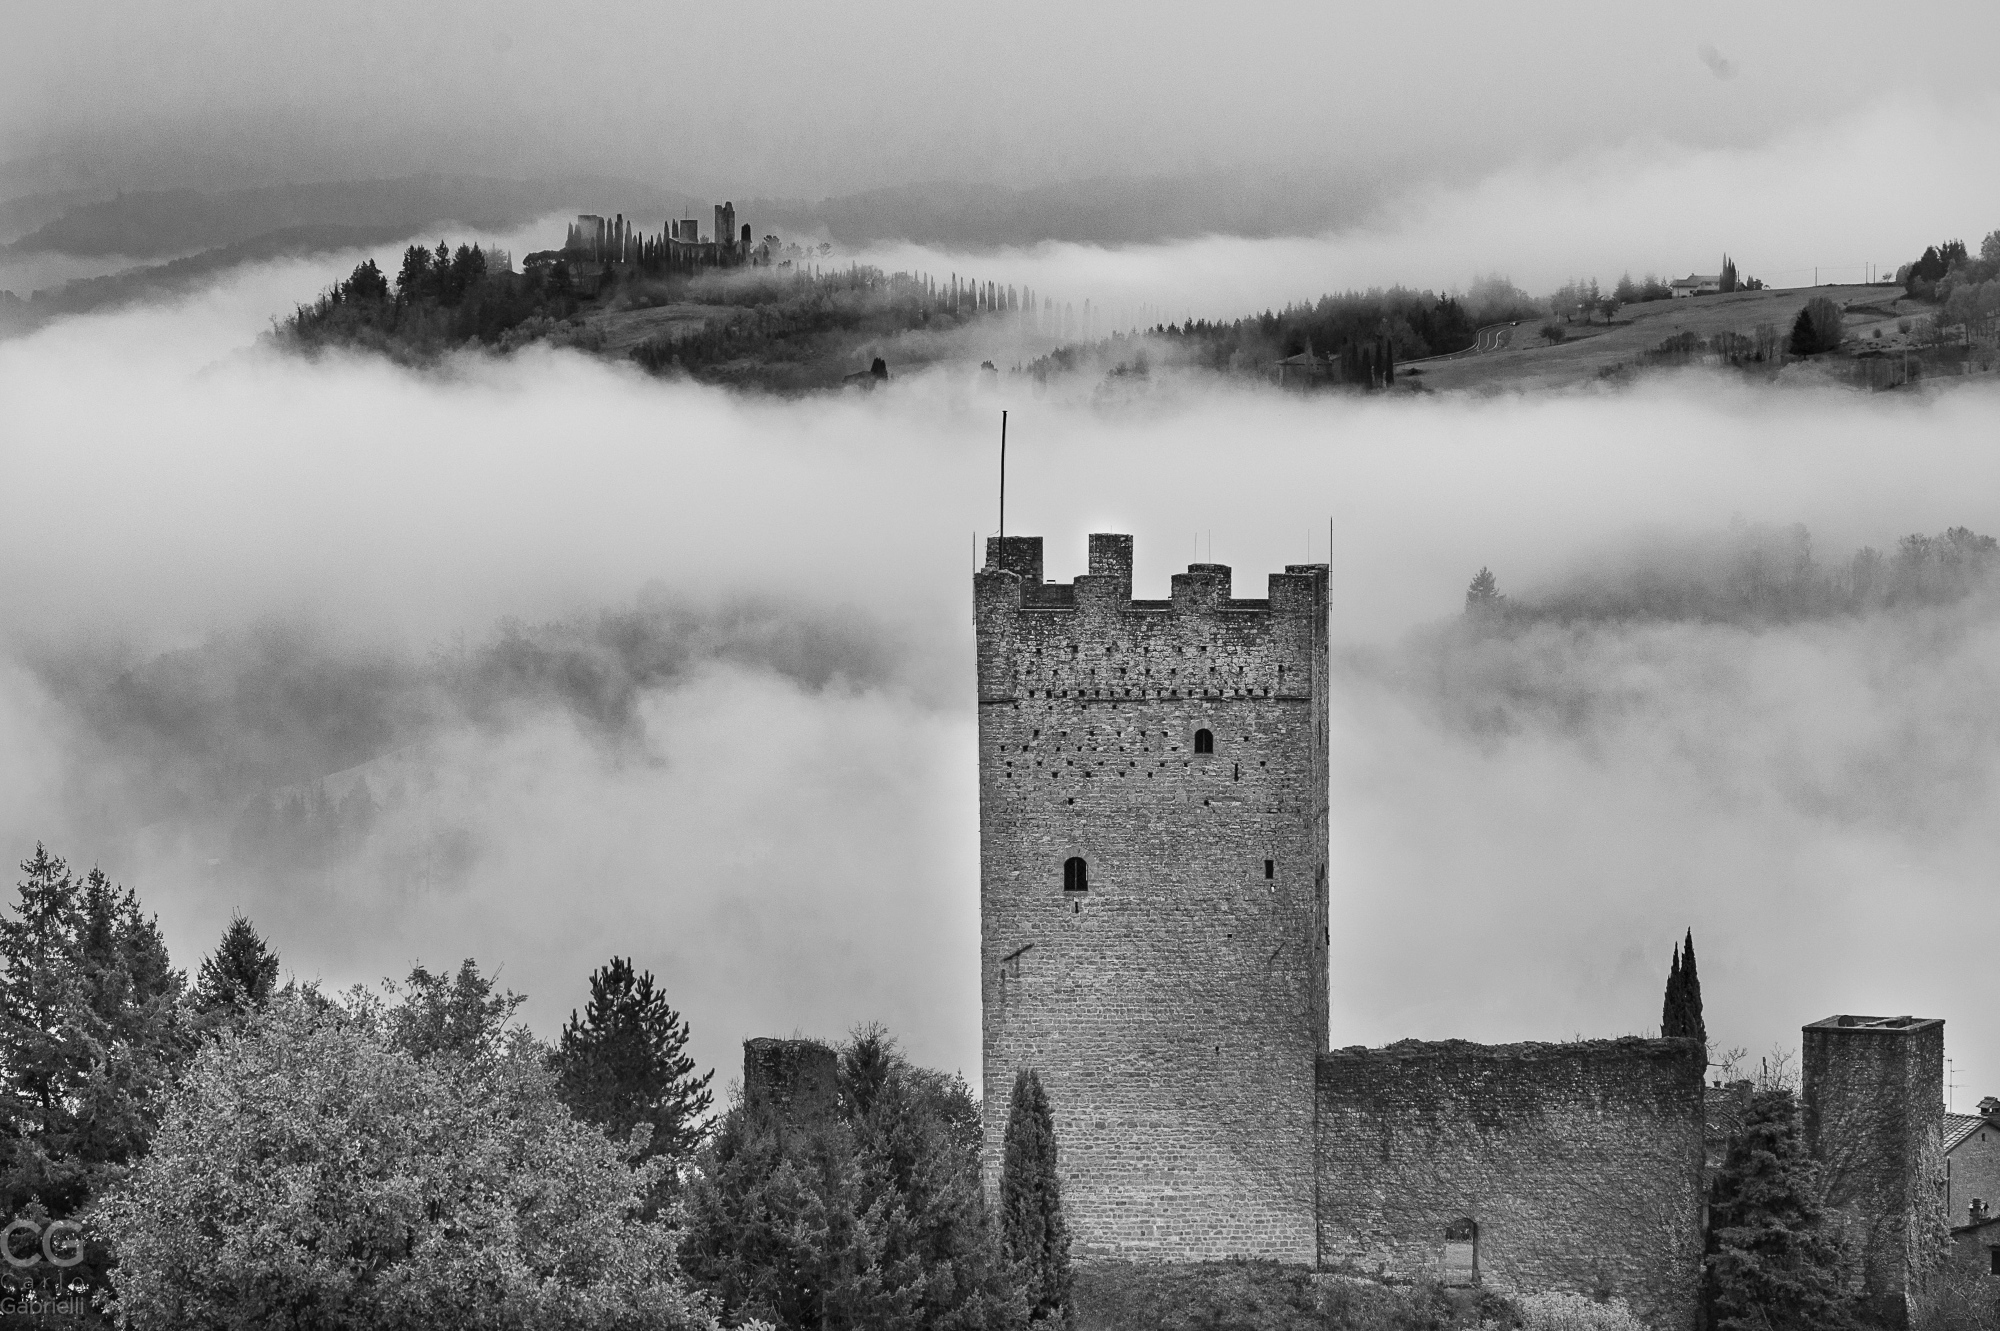 The castles of Porciano and Romena